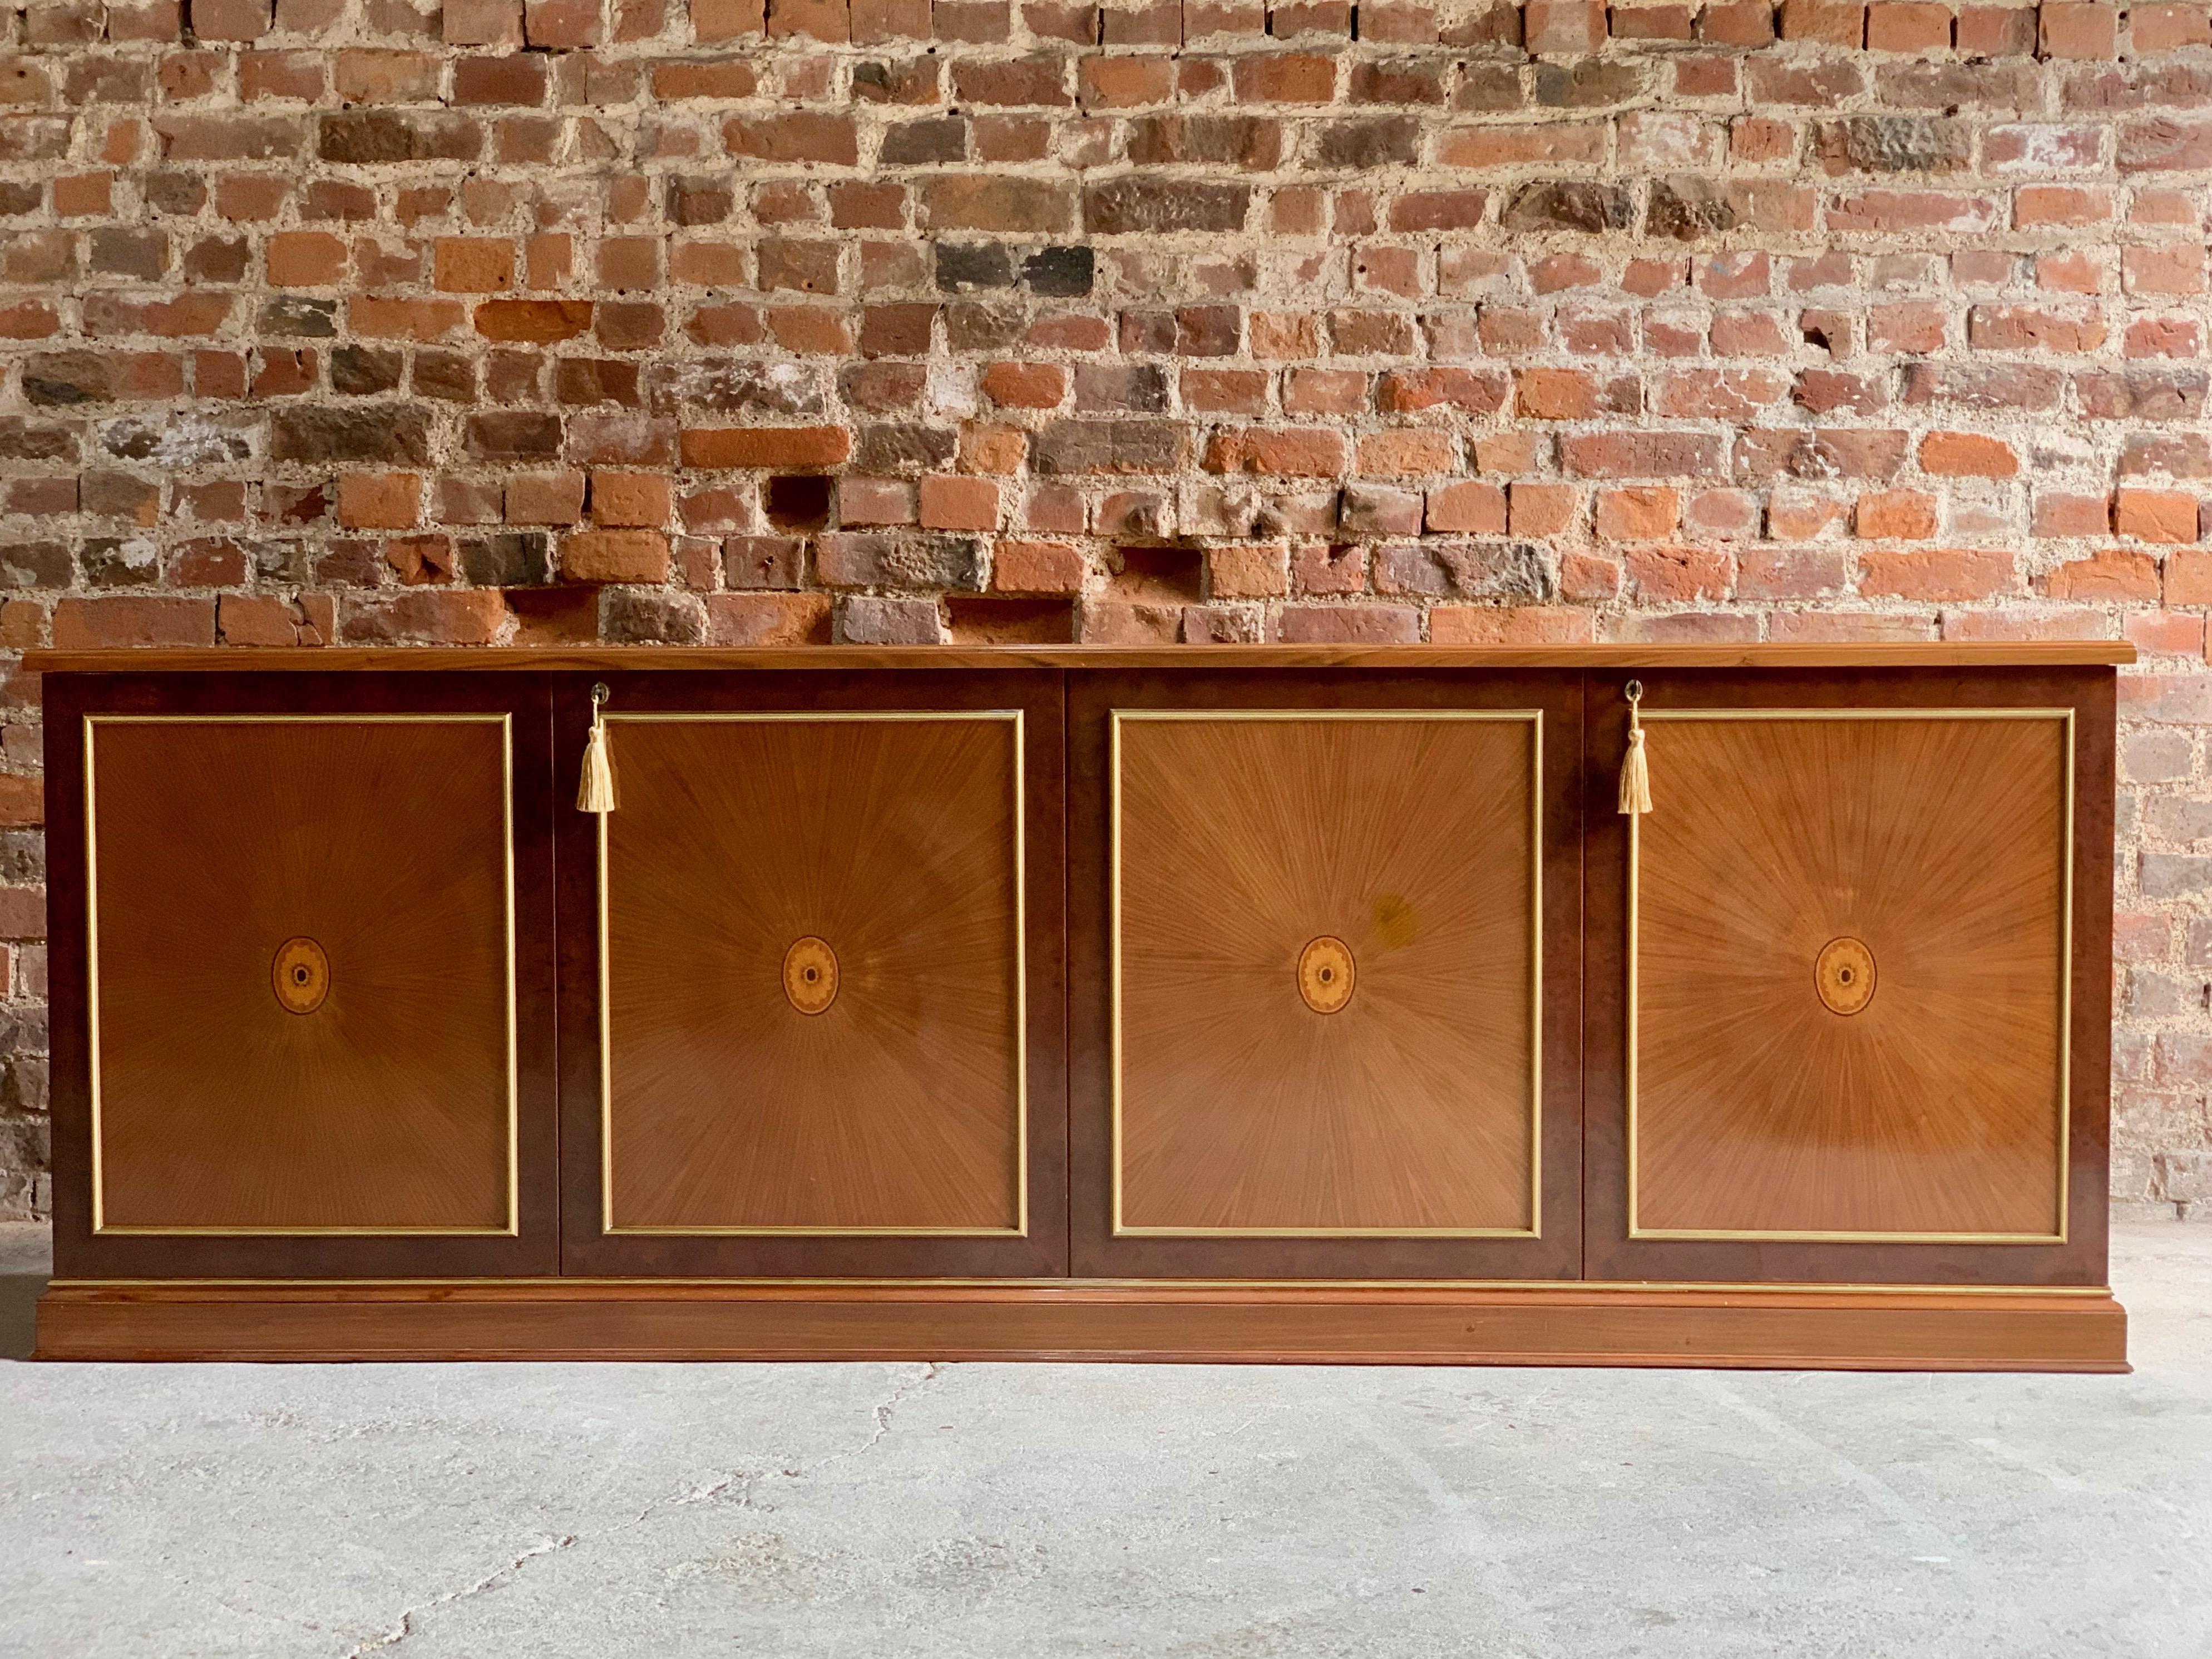 Stunning large late 20th century Italian walnut lacquered credenza or sideboard of the highest quality.

The long and sleek rectangular top with fabulous inlaid marquetry work with floral scrolls and patterns richly inlaid in walnut, mahogany and